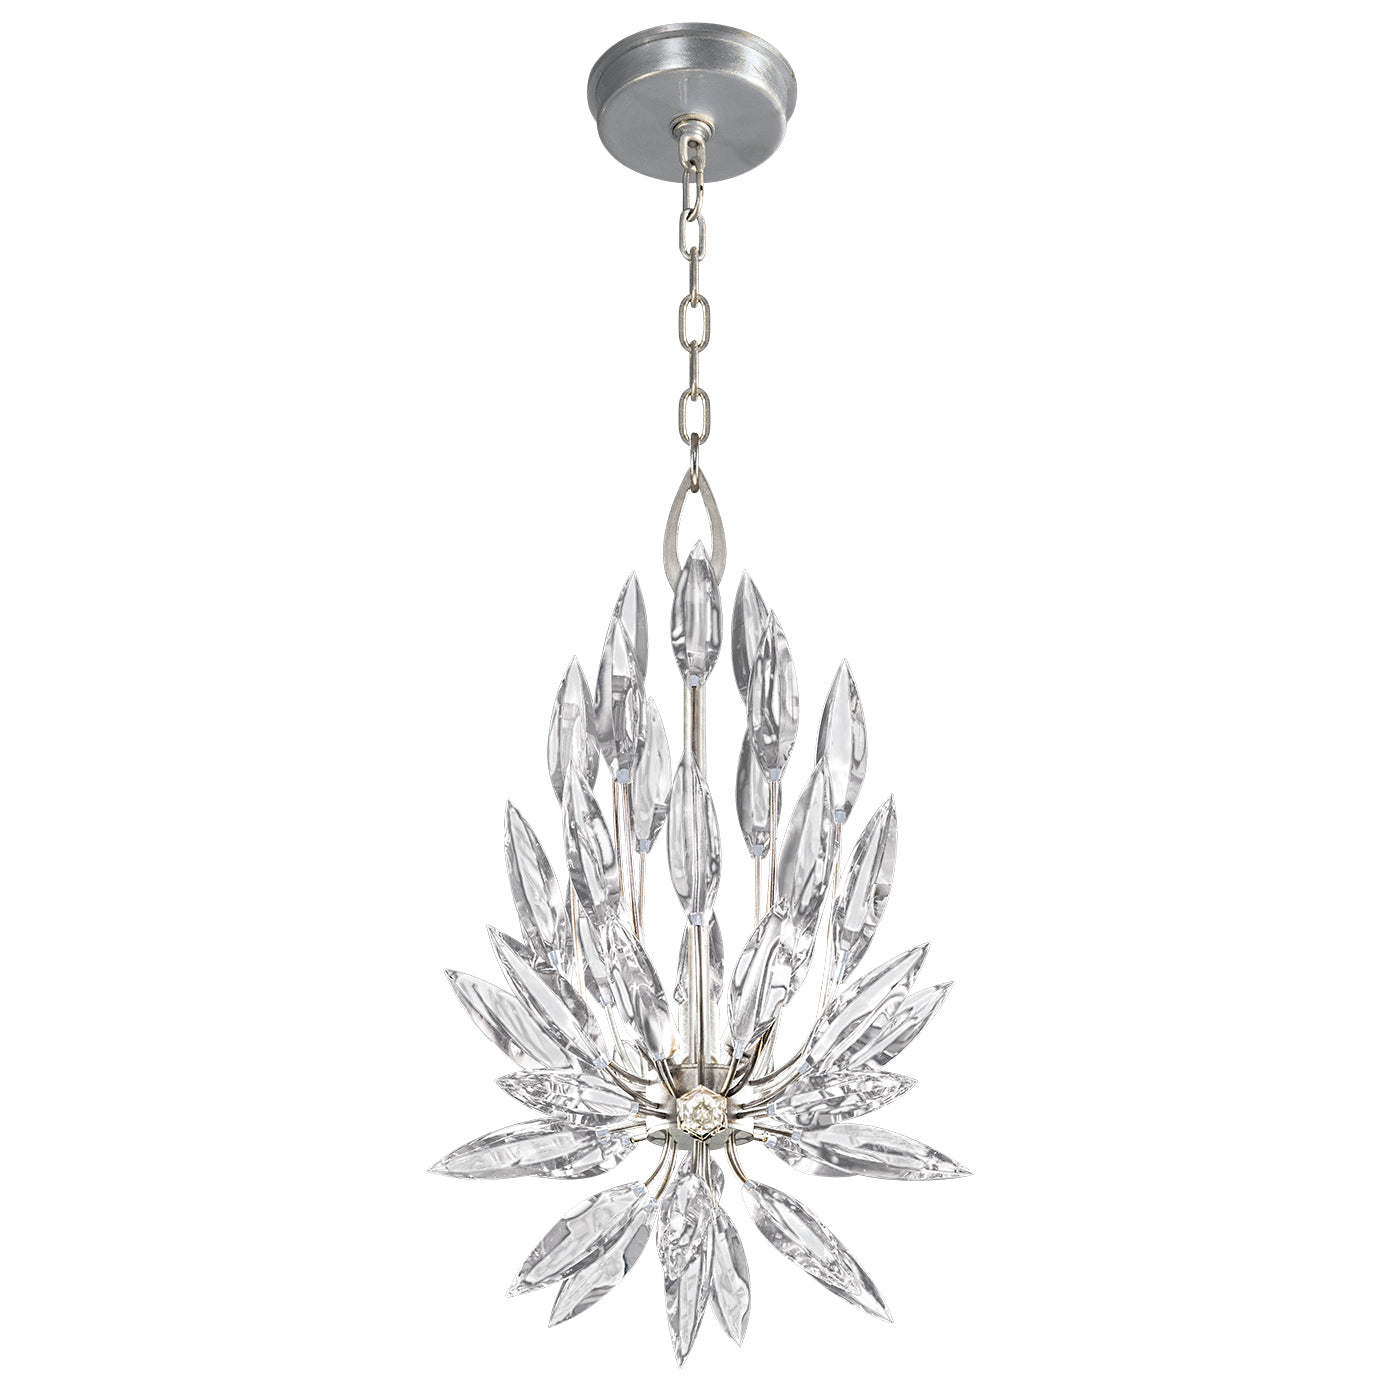 Fine Art Handcrafted Lighting Lily Buds Pendant Chandeliers Fine Art Handcrafted Lighting Silver 12 x 22 